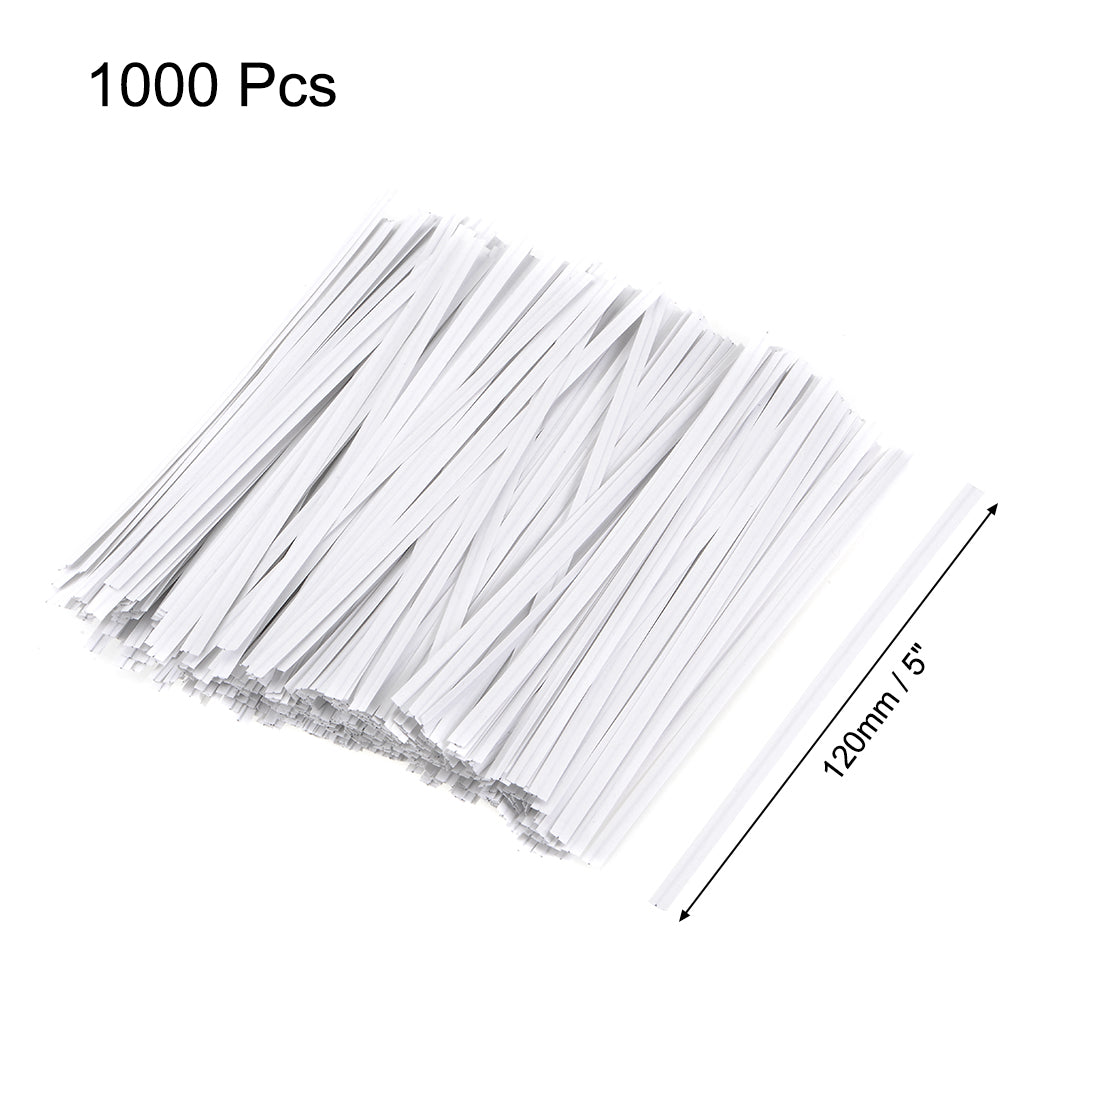 uxcell Uxcell Long Strong Twist Ties 4.7 Inches Quality  Closure Tie for Tying Gift Bags Art Craft Ties Manage Cords White 1000pcs